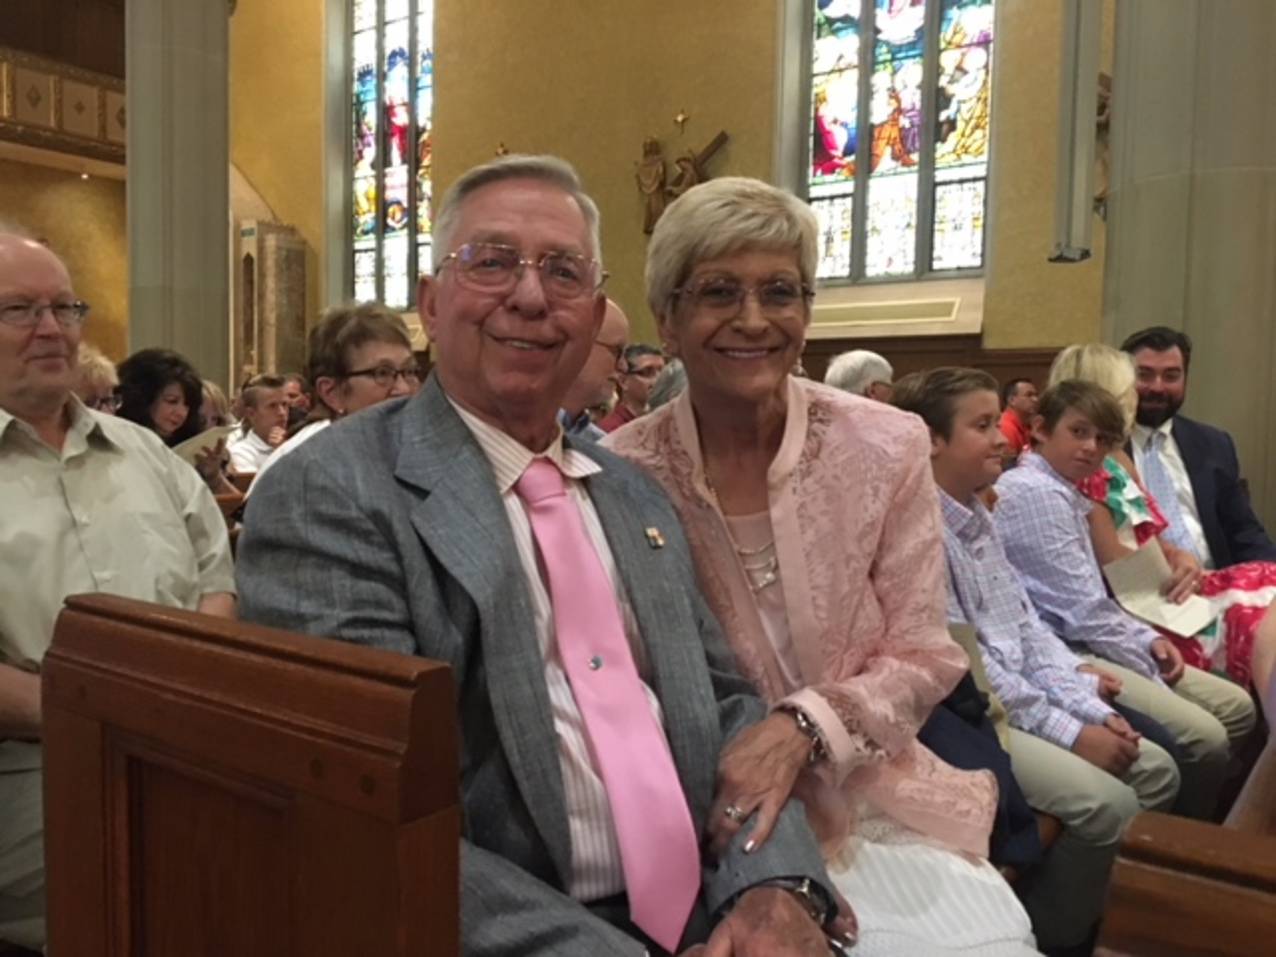 Registration open for special Oct. 12 Mass for couples celebrating golden wedding anniversaries 